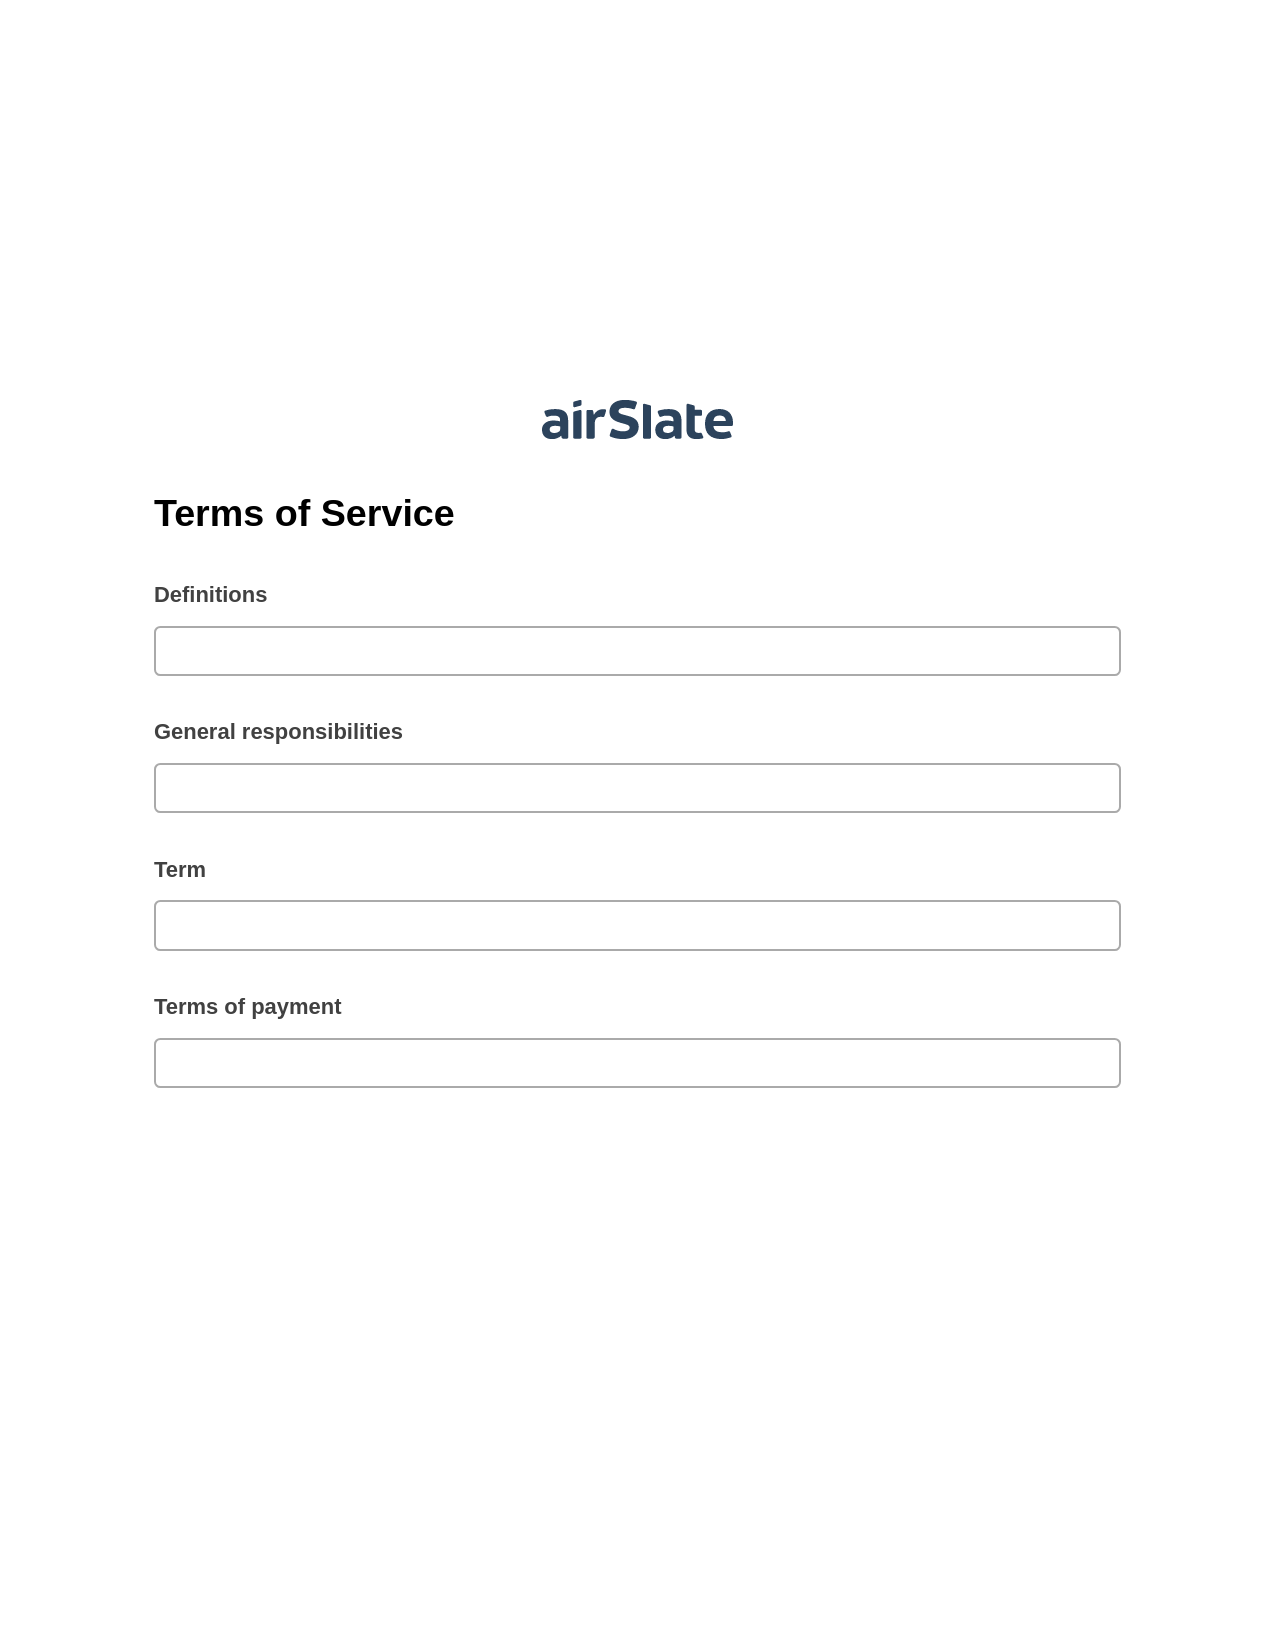 Terms of Service Pre-fill from CSV File Dropdown Options Bot, Create slate addon, Slack Notification Postfinish Bot